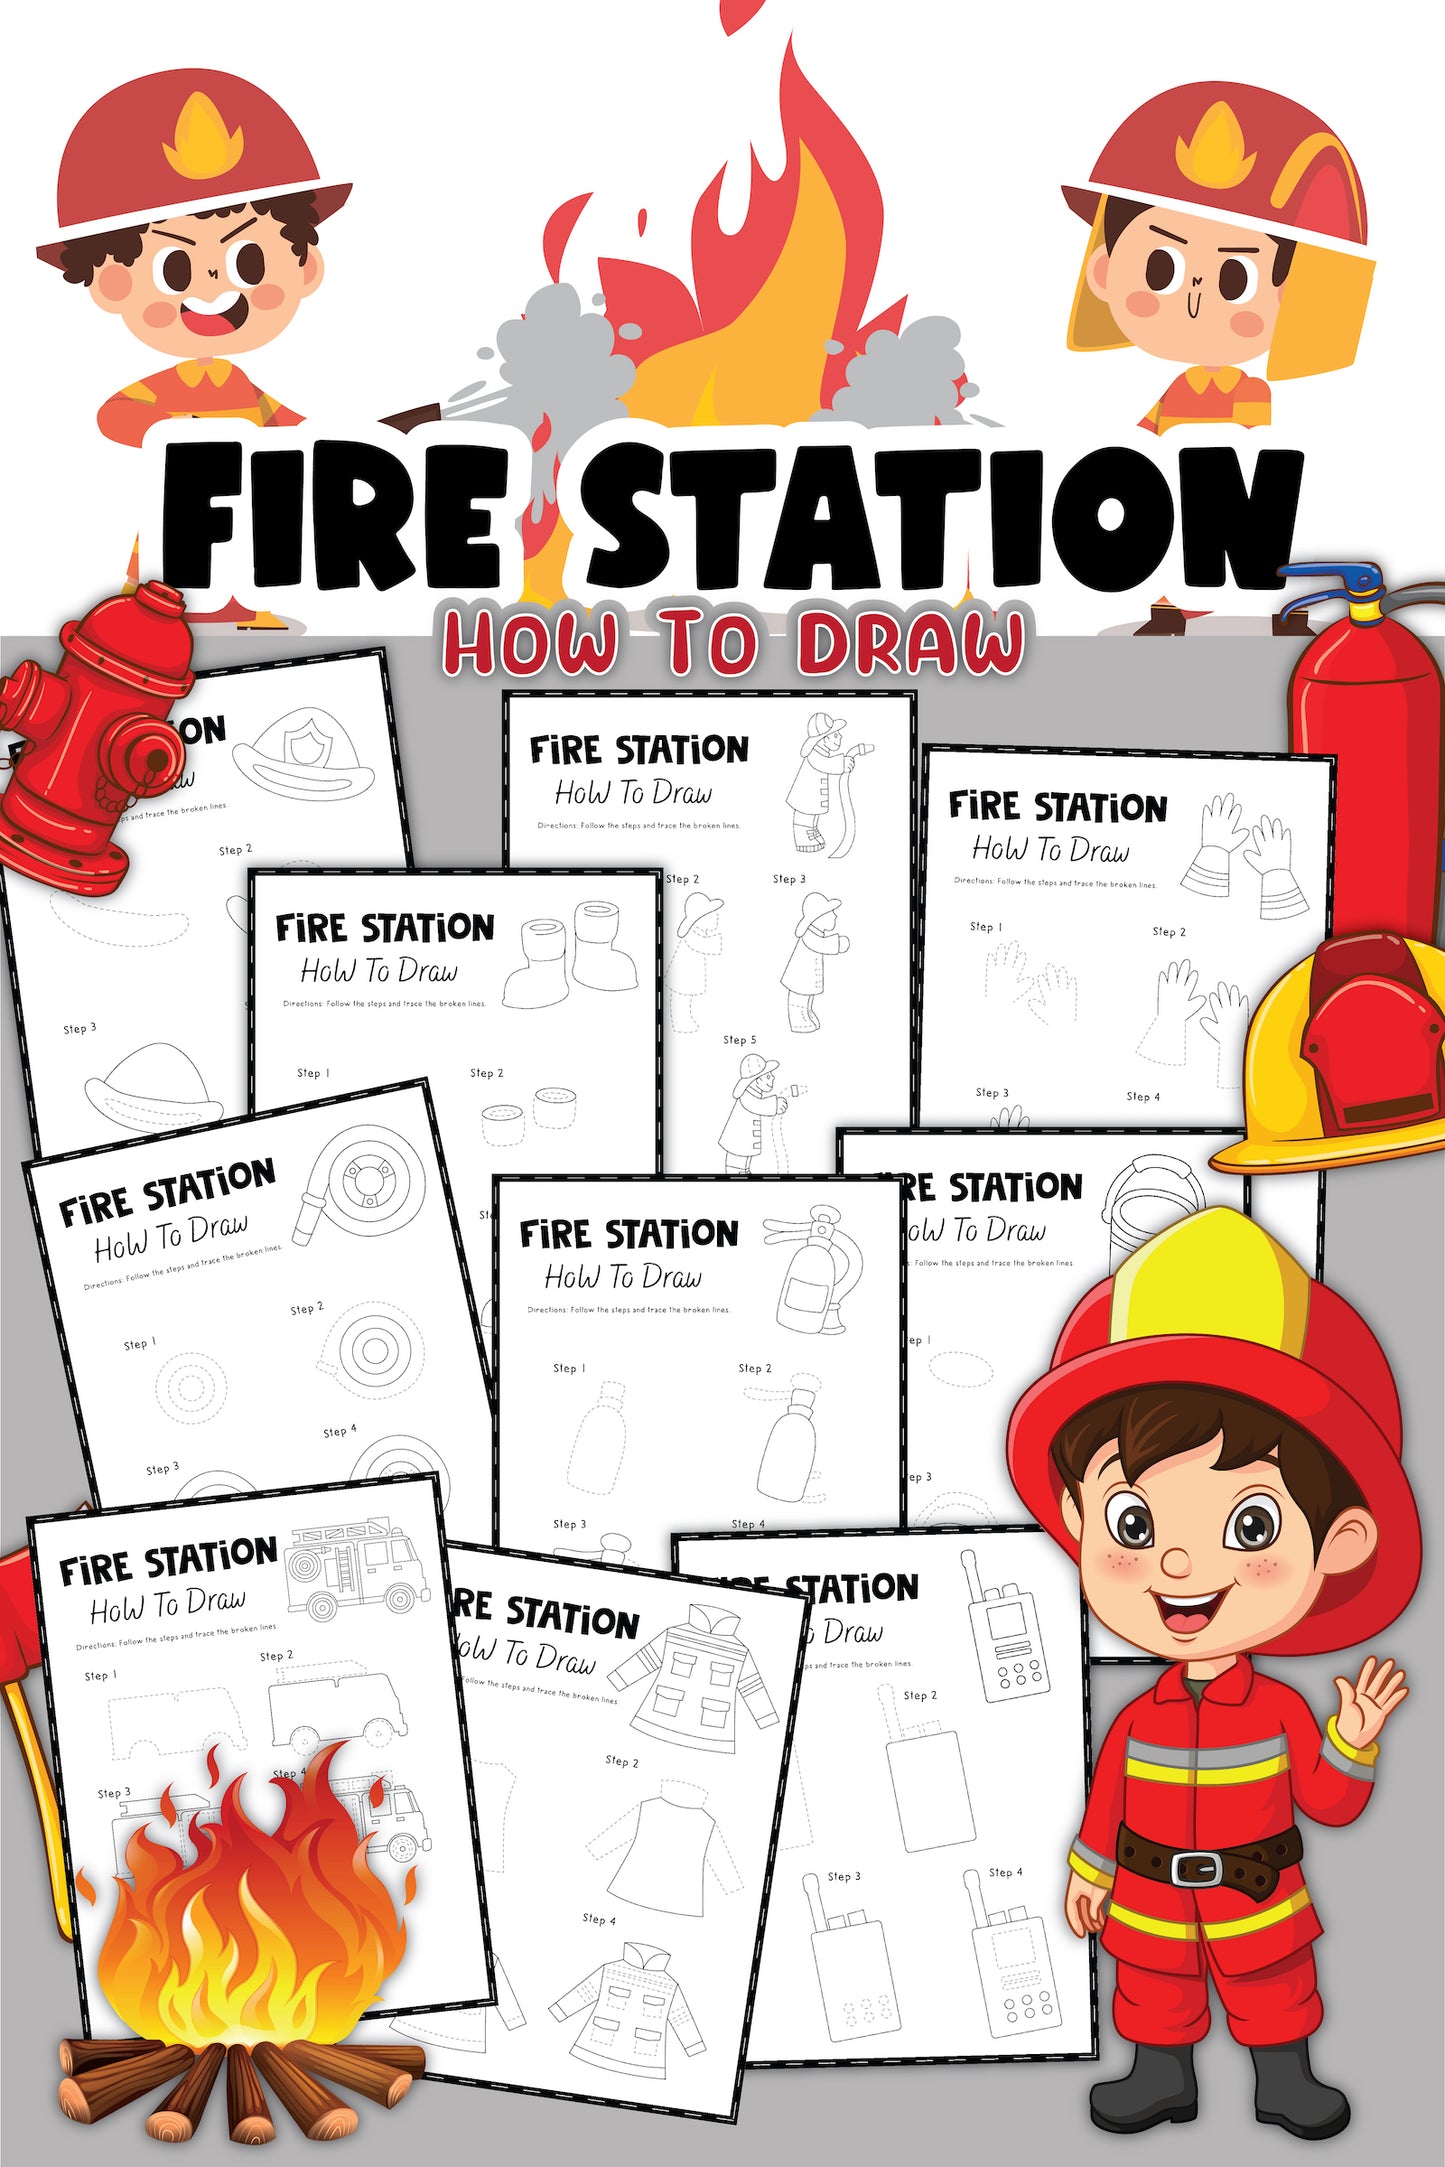 How to Draw a Fire Station and Fireman Printable (10 Pages)